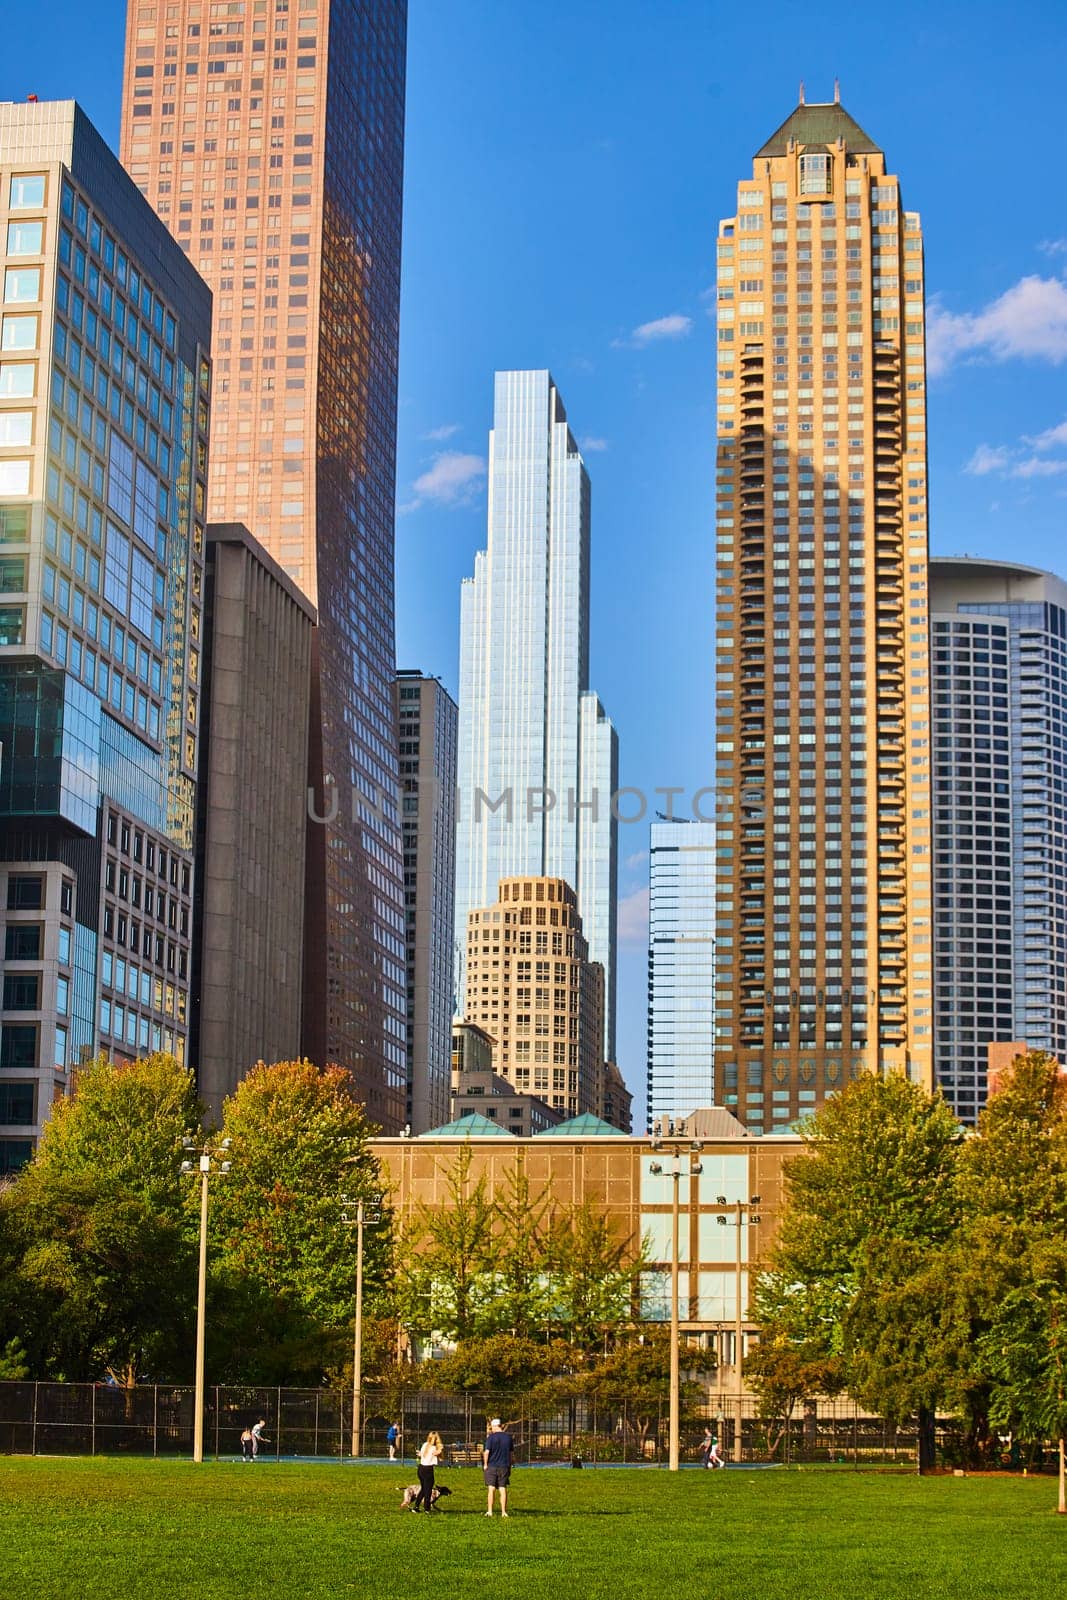 Park on sunny day in inner city Chicago with bright, golden skyscrapers and blue sky by njproductions